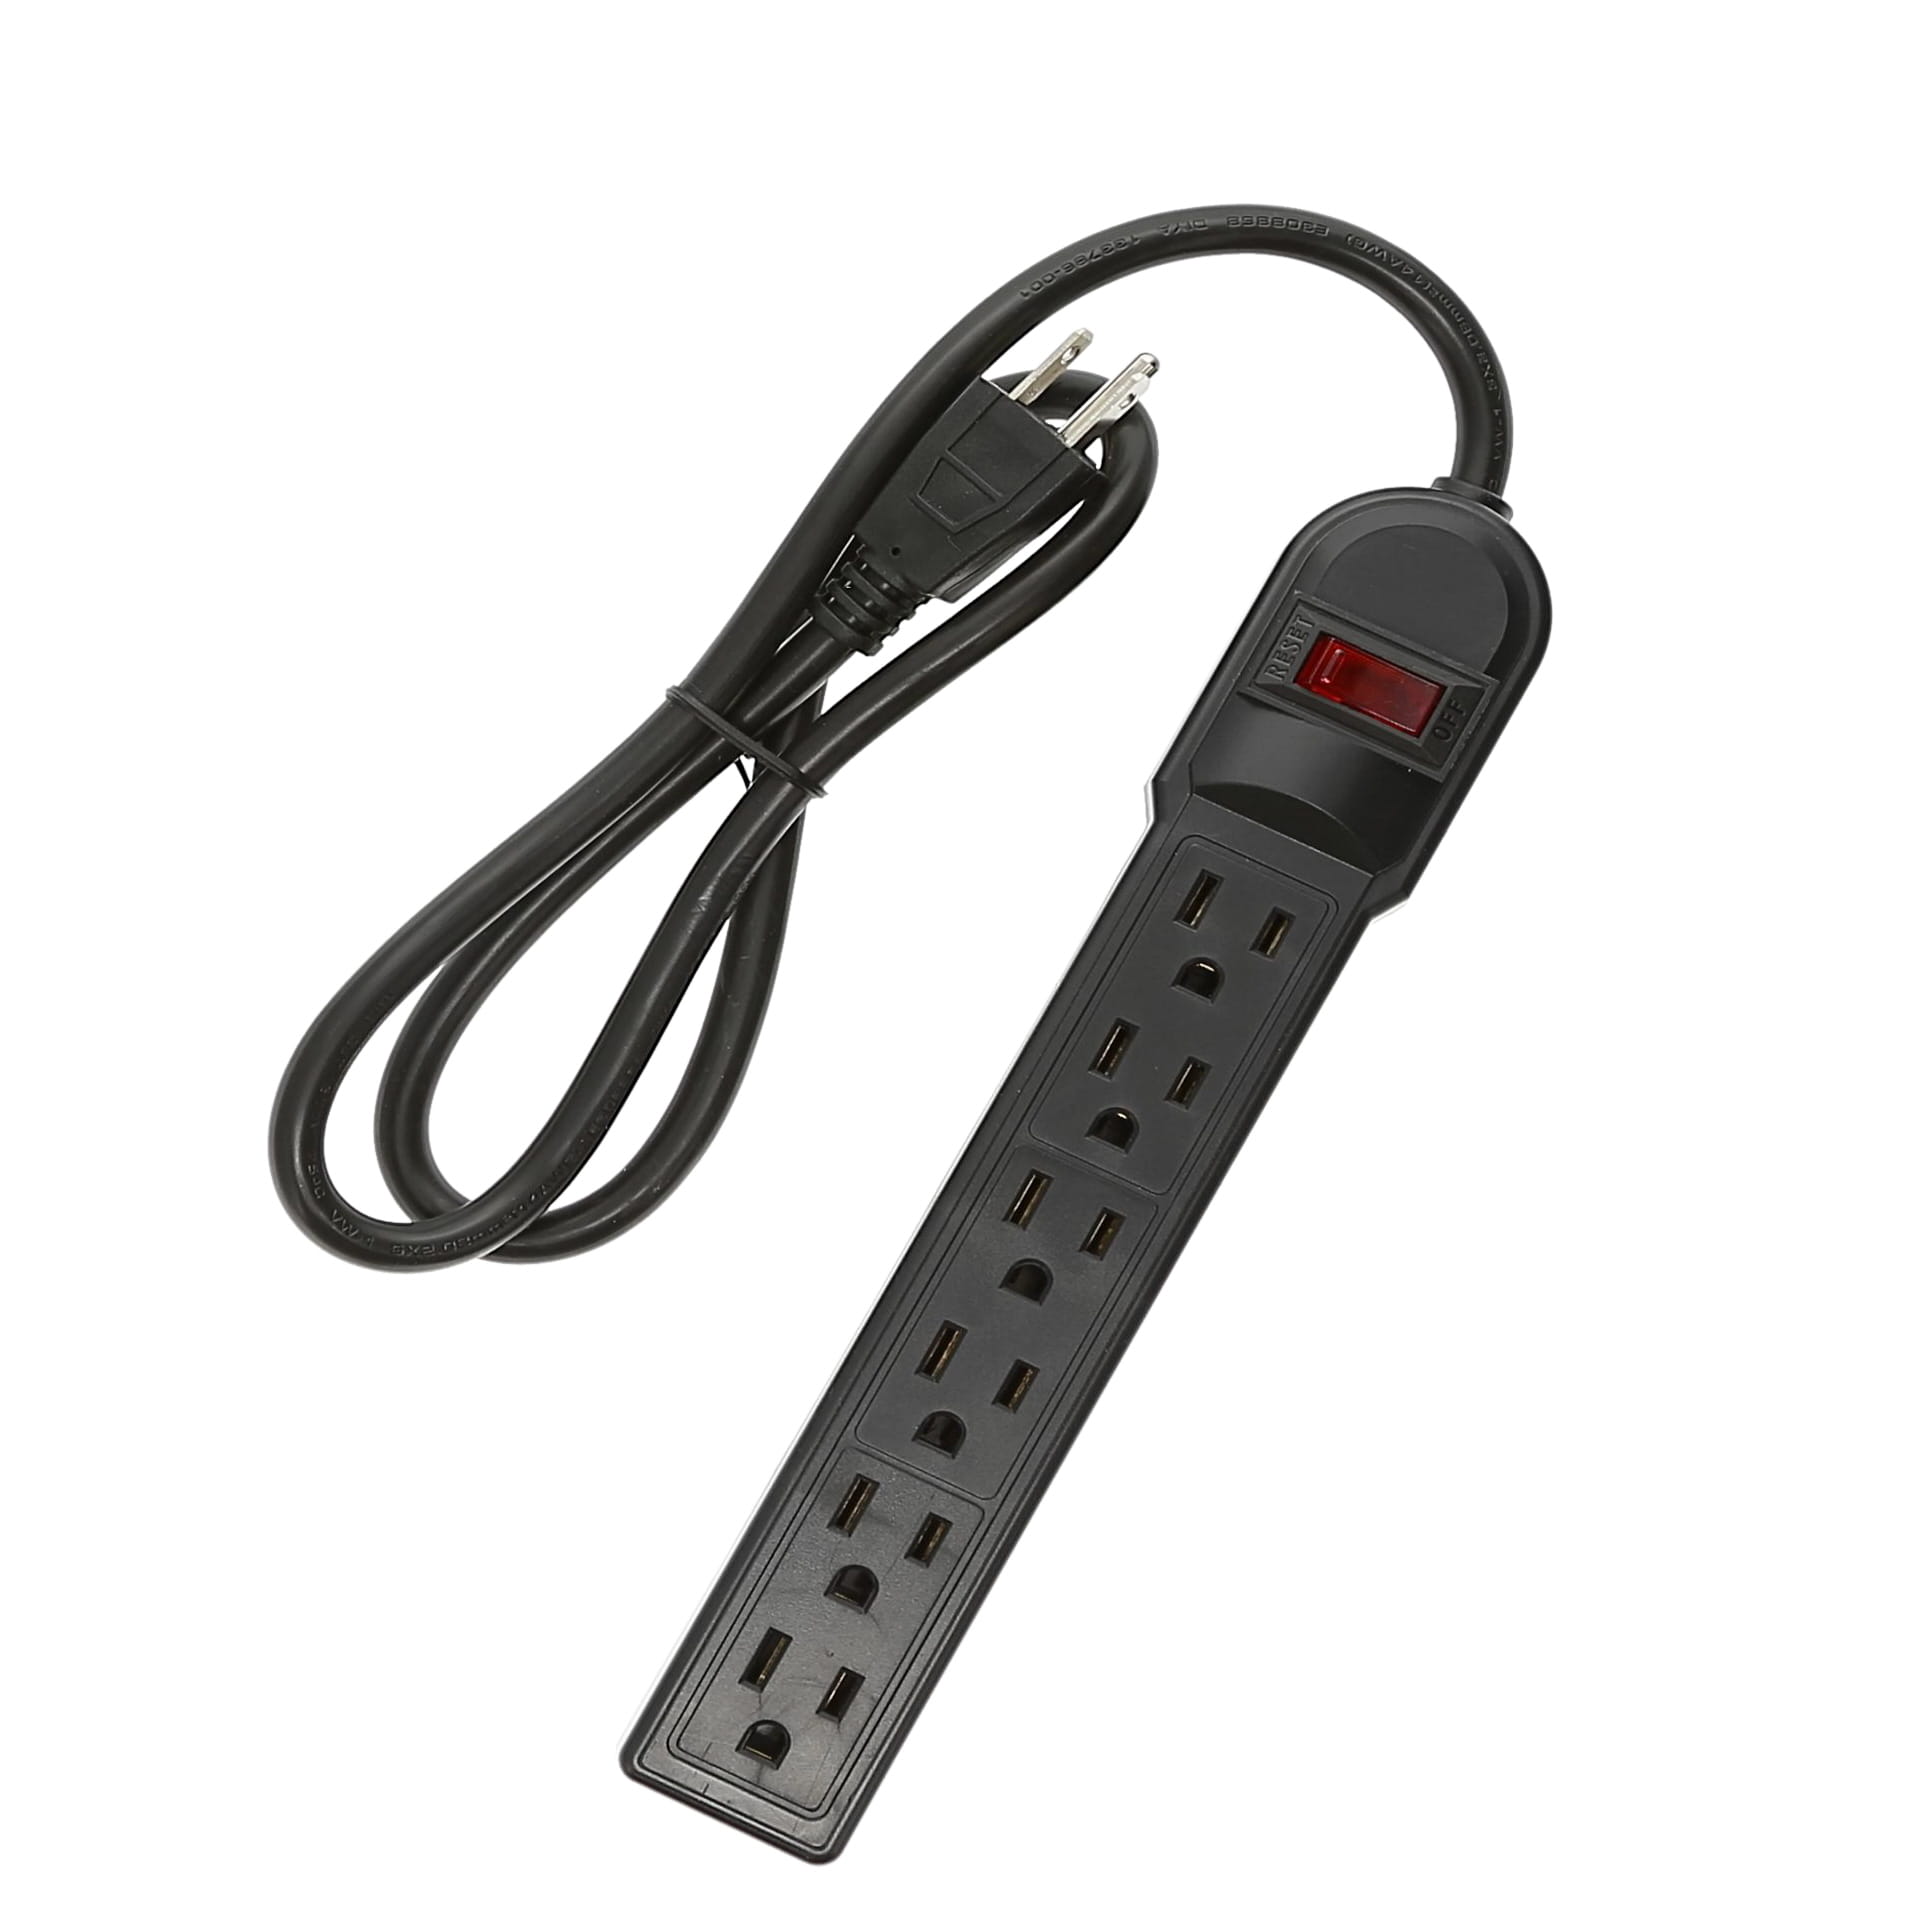 6-Outlet Surge Protector 14AWG/3, 15A, 90J